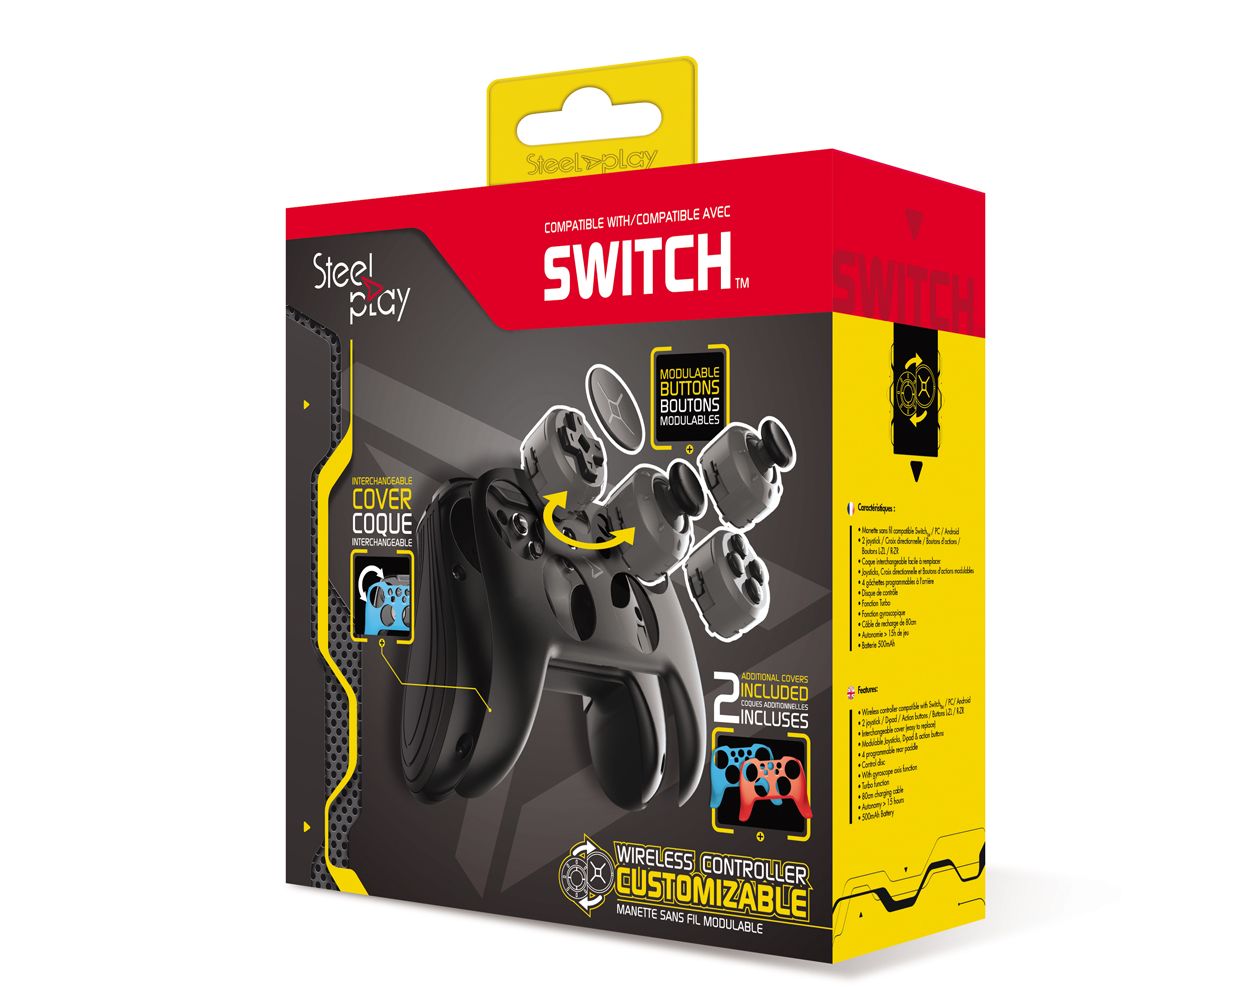 *WIRELESS CUSTOMIZABLE CONTROLLER + 2 CASES